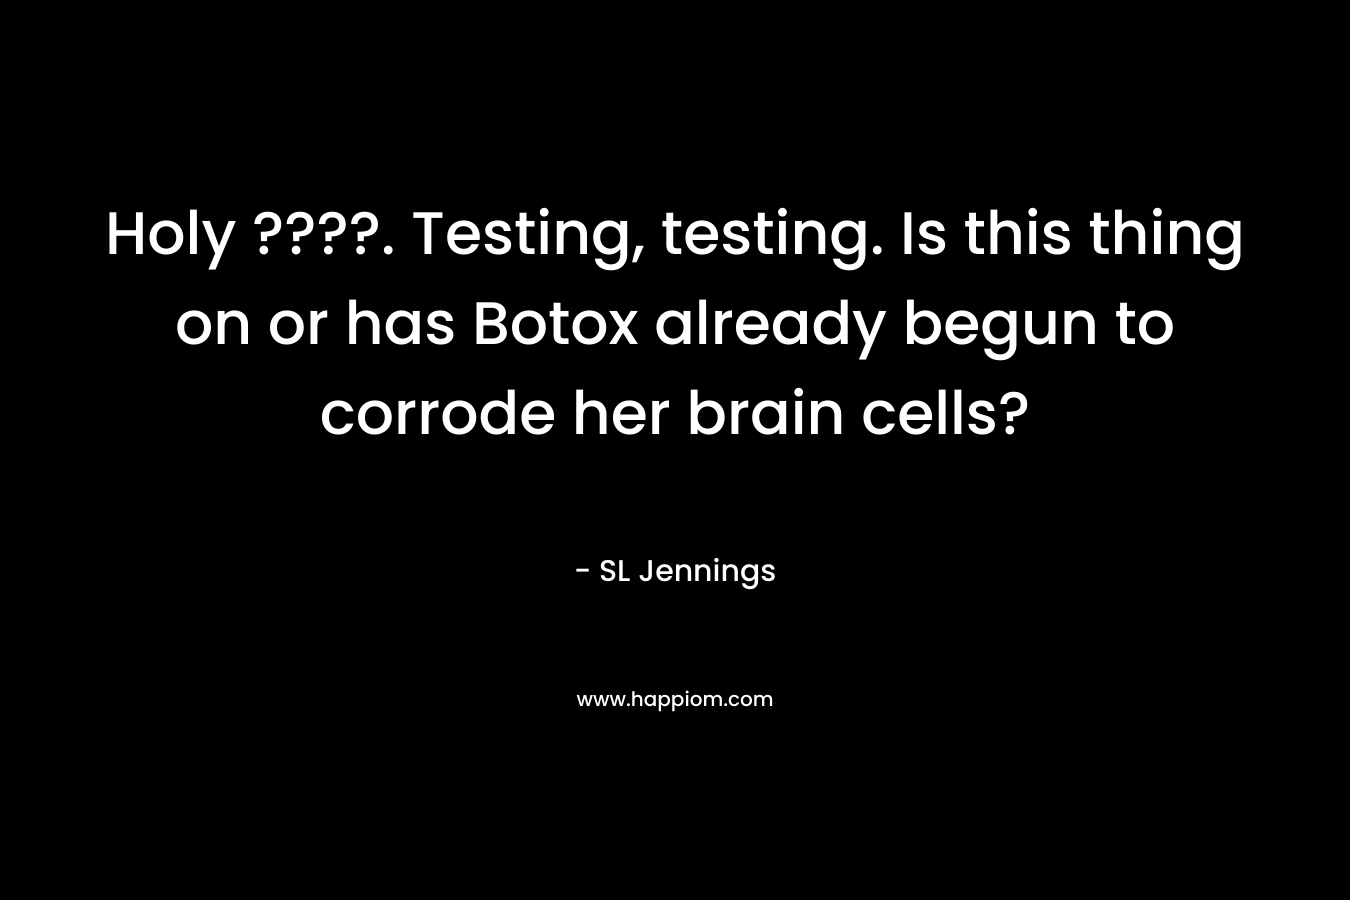 Holy ????. Testing, testing. Is this thing on or has Botox already begun to corrode her brain cells? – SL Jennings